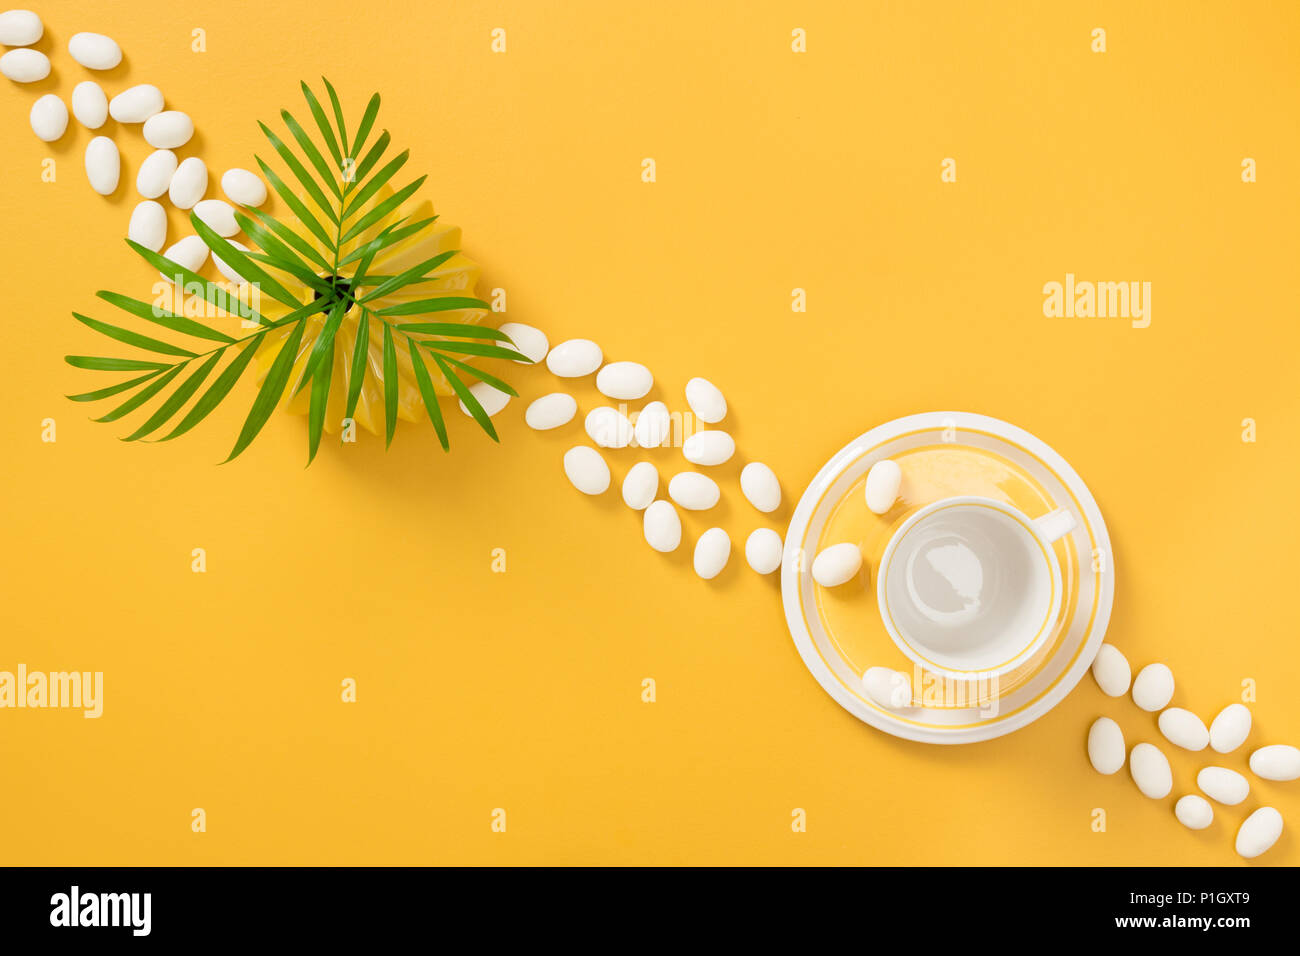 White chocolate candies, palm tree leaves and teacup on yellow background. Stock Photo